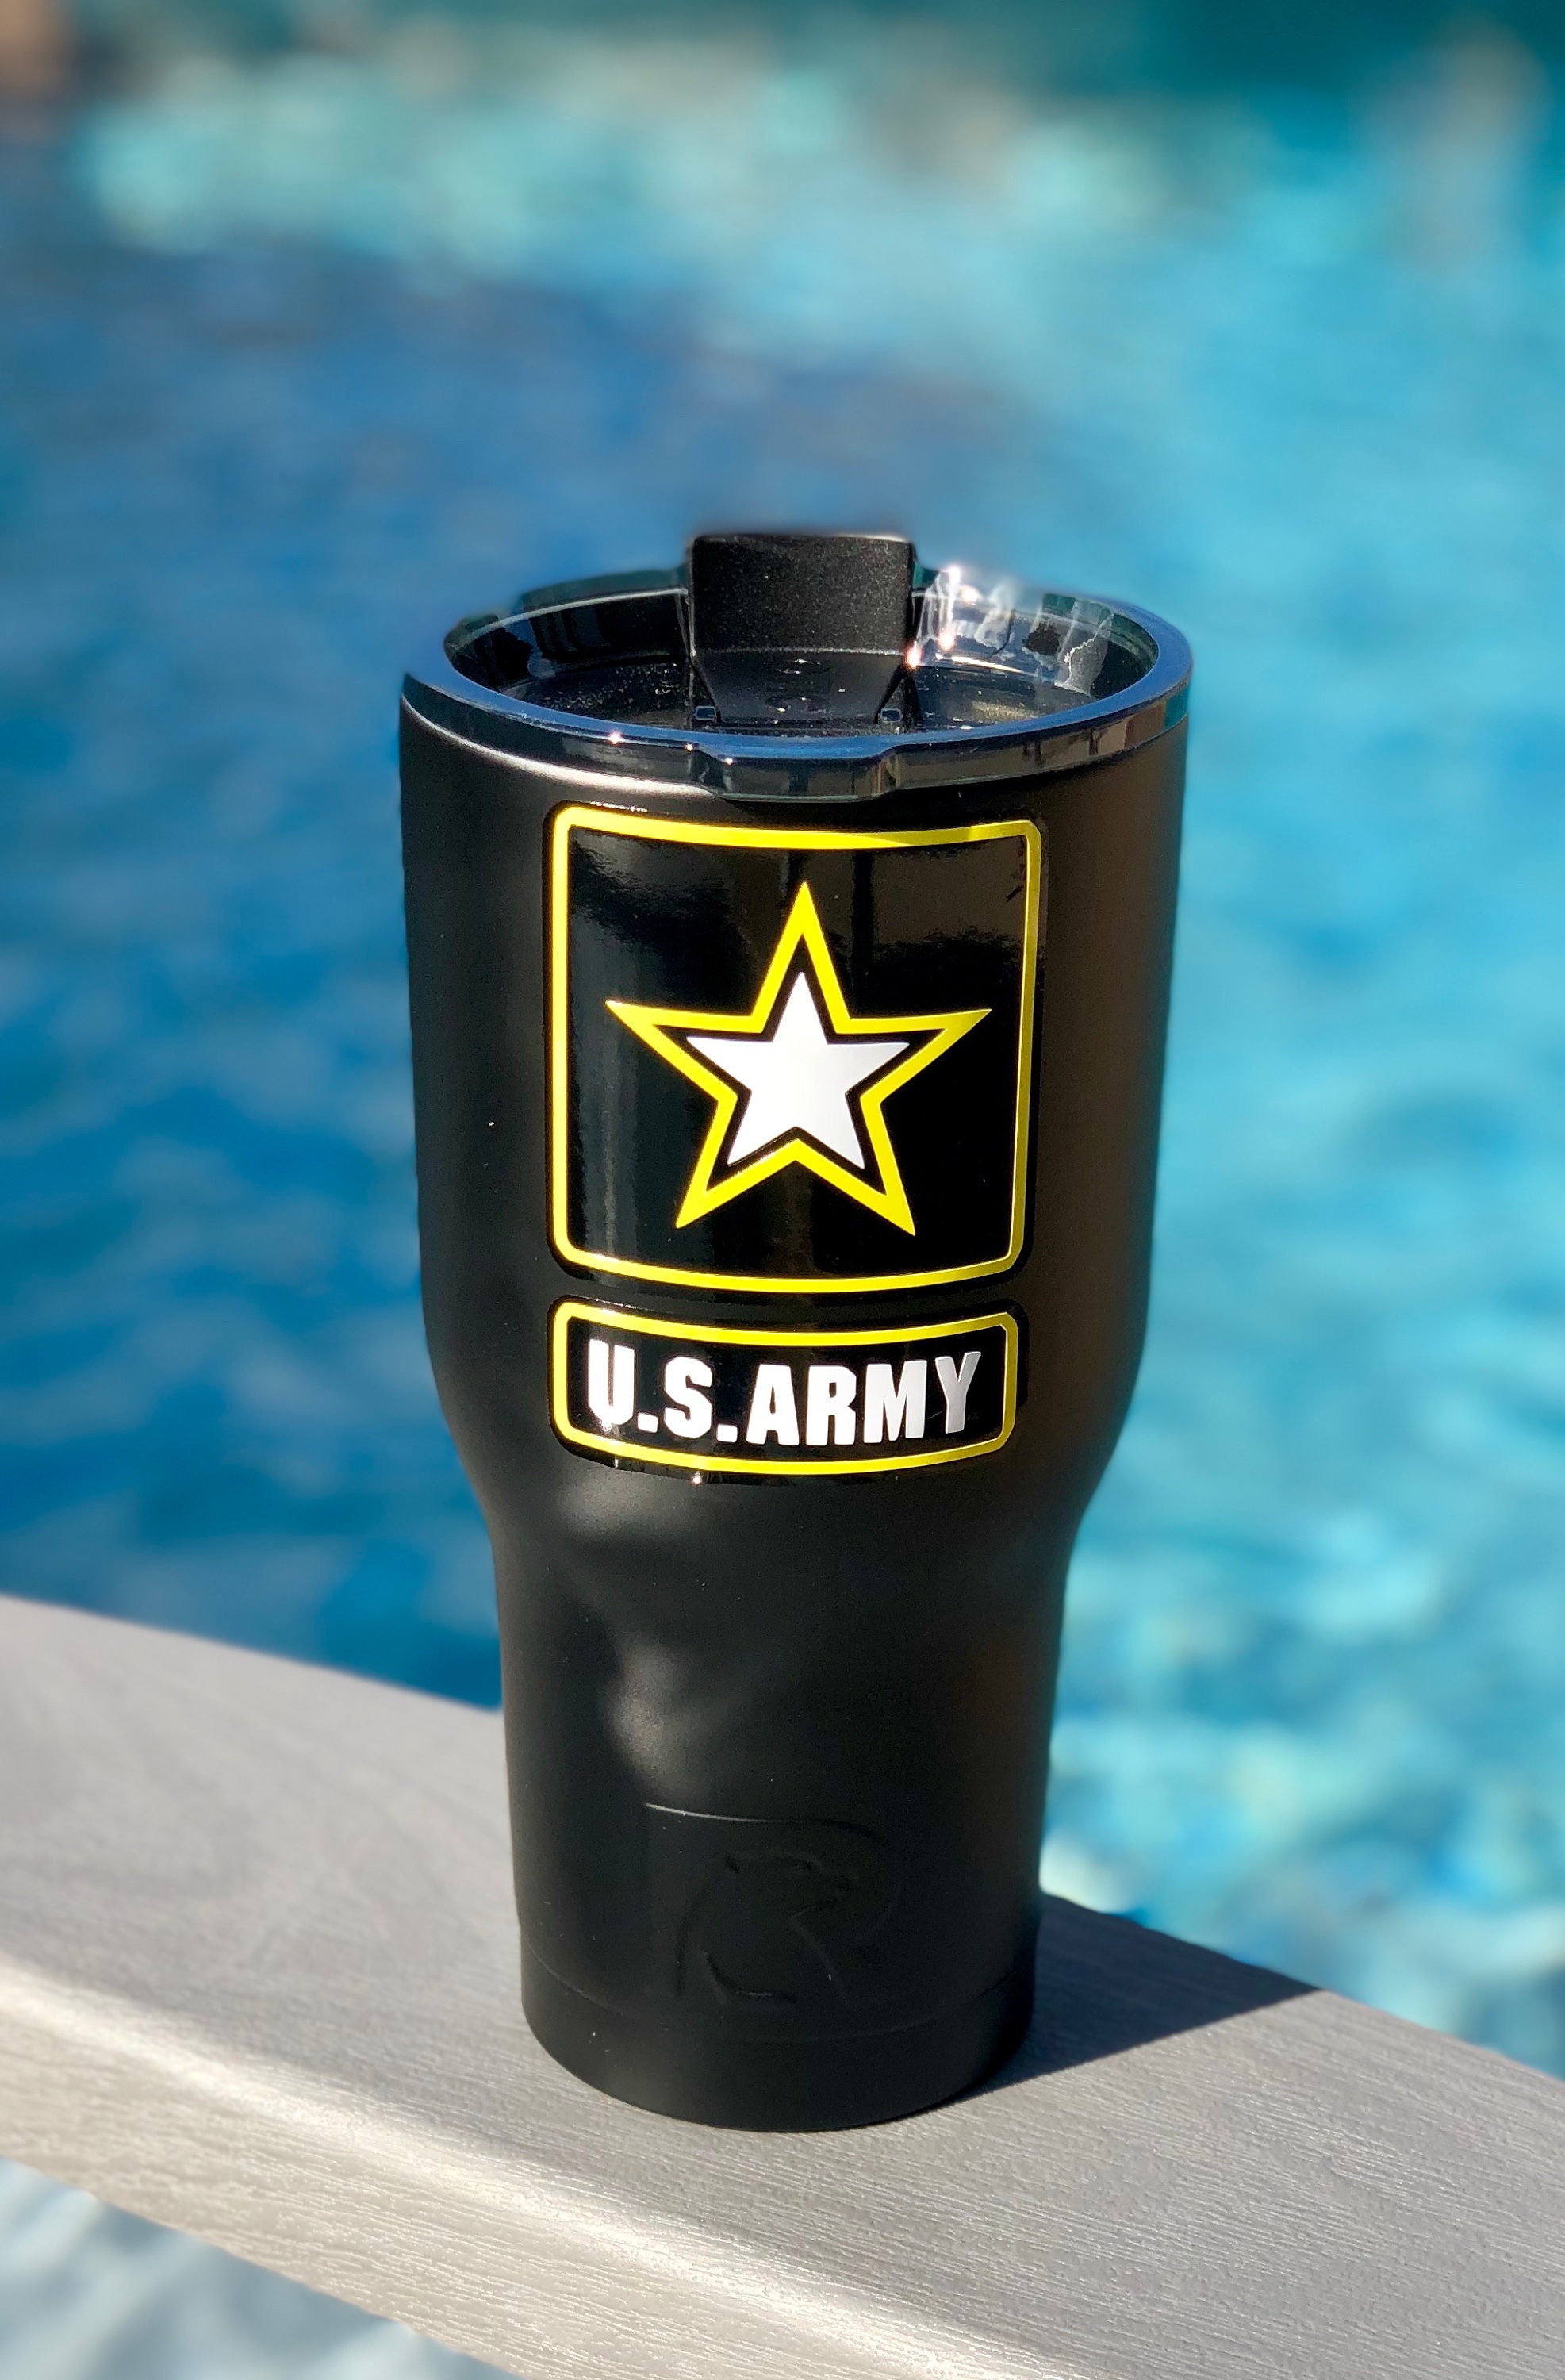 Living The Dream Army Mug - RTIC Tumbler - Army Travel Cup - Free Shipping